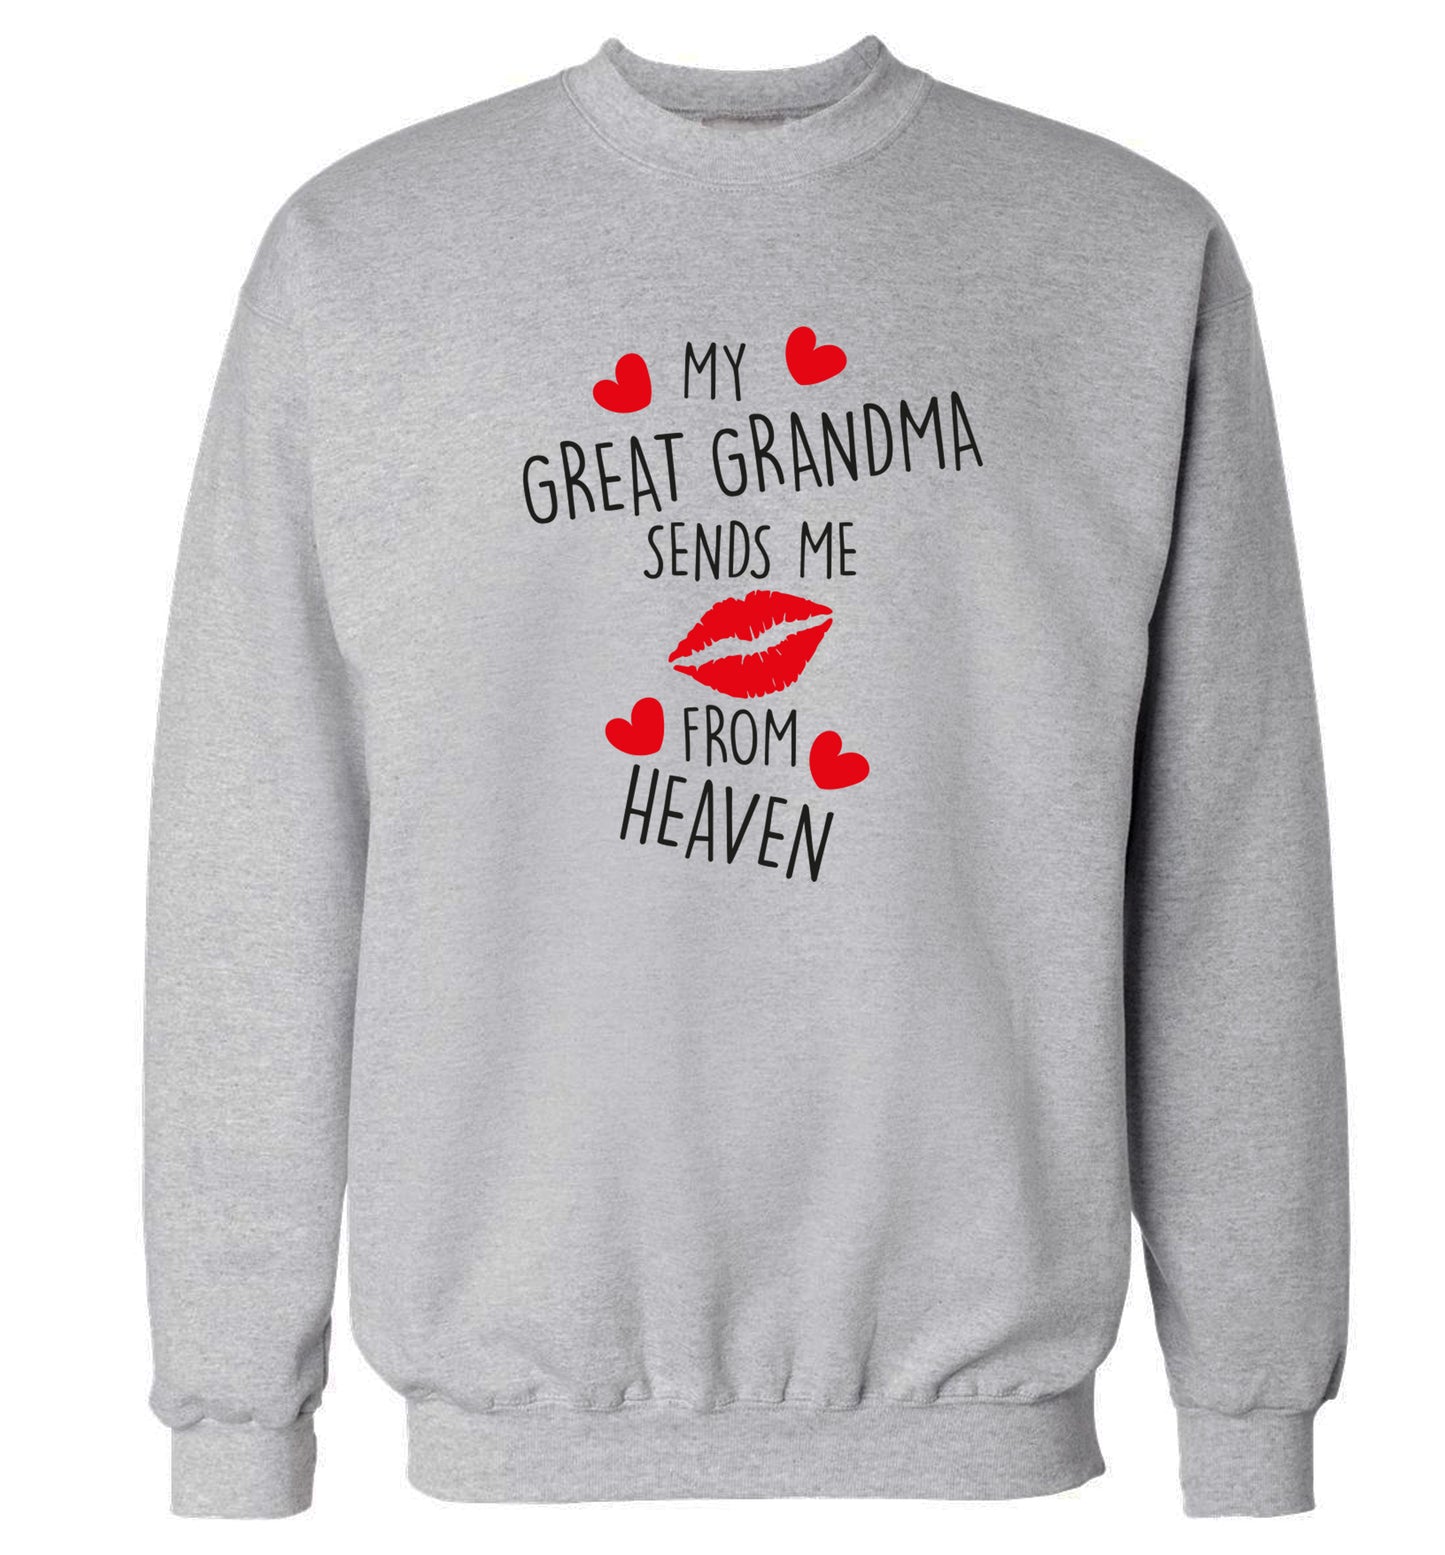 My great grandma sends me kisses from heaven Adult's unisex grey Sweater 2XL